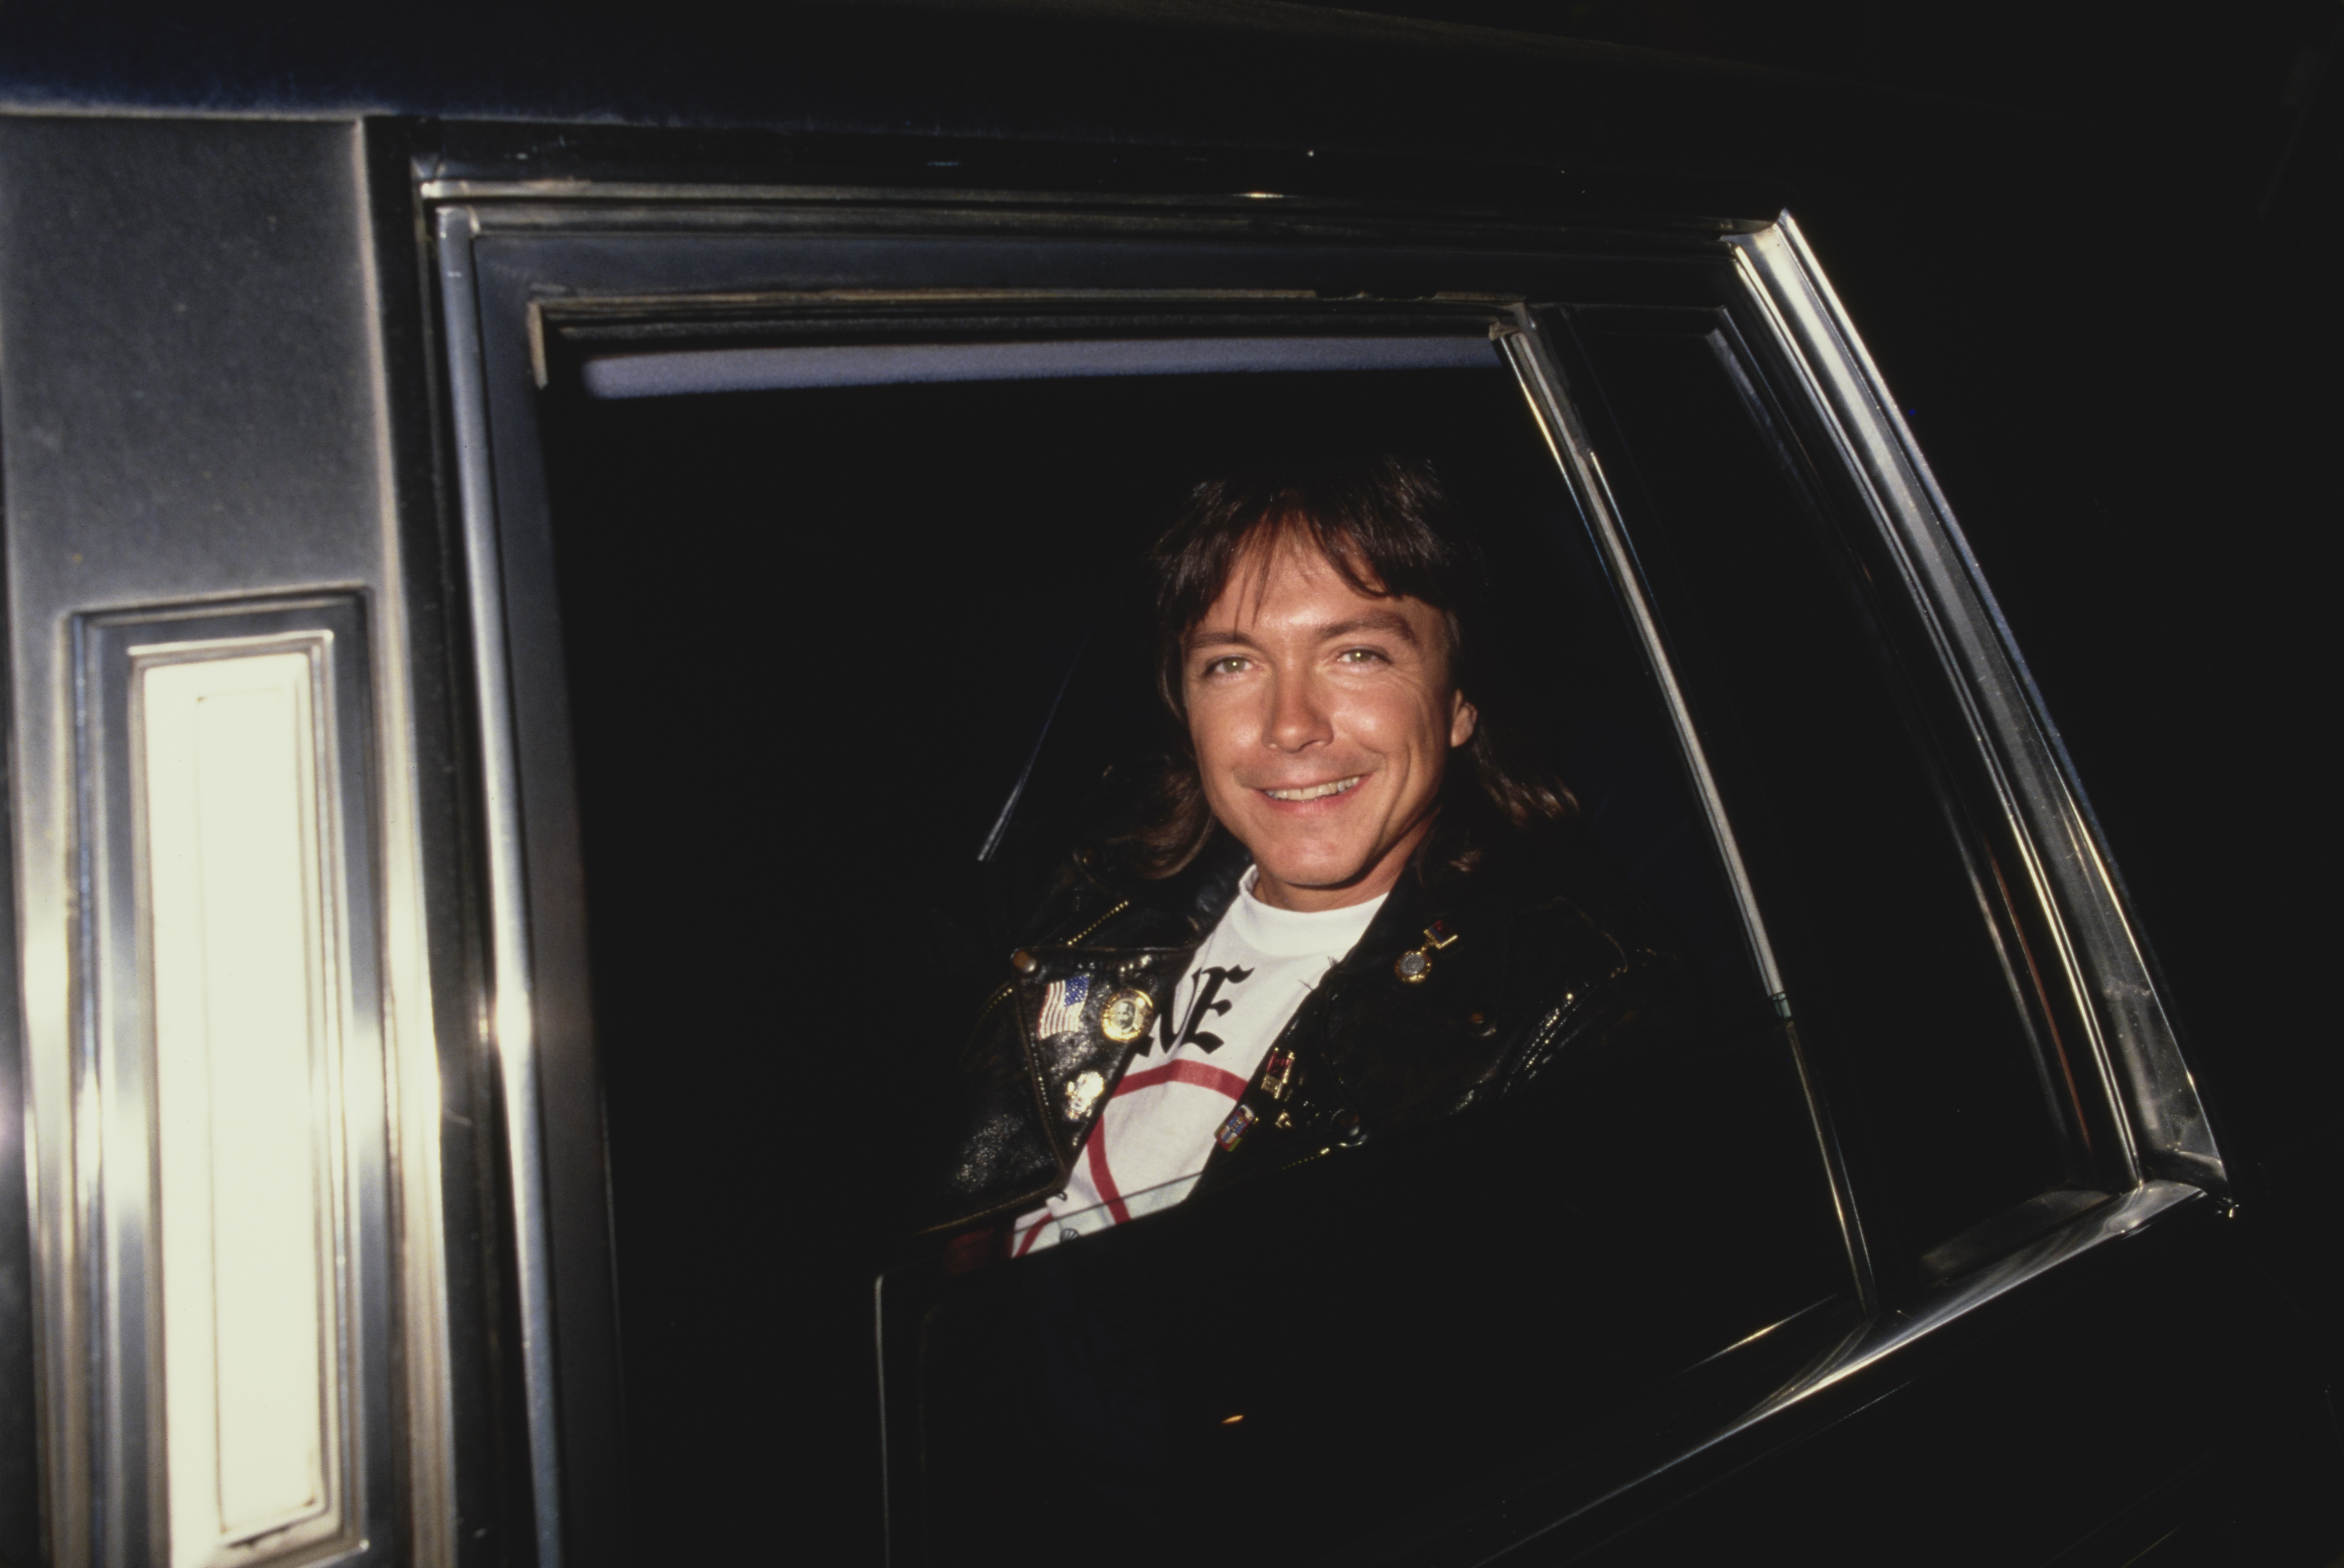 David Cassidy on June 6, 1990 in New York City | Source: Getty Images